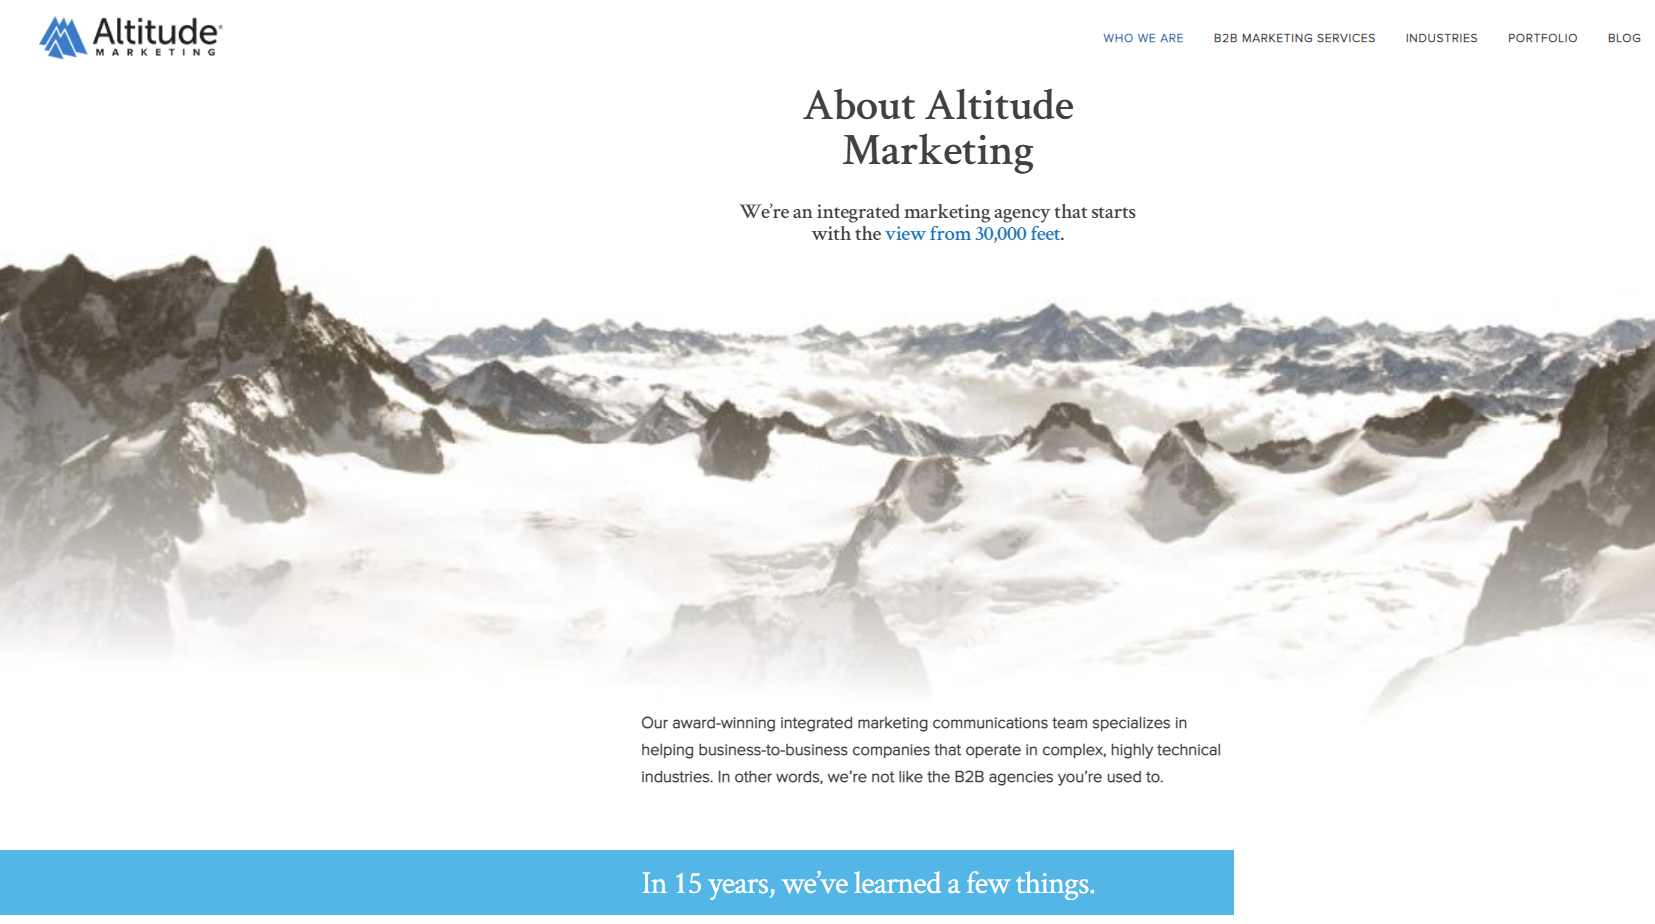 Altitude has an unconventional approach to the About us page - one of the website elements